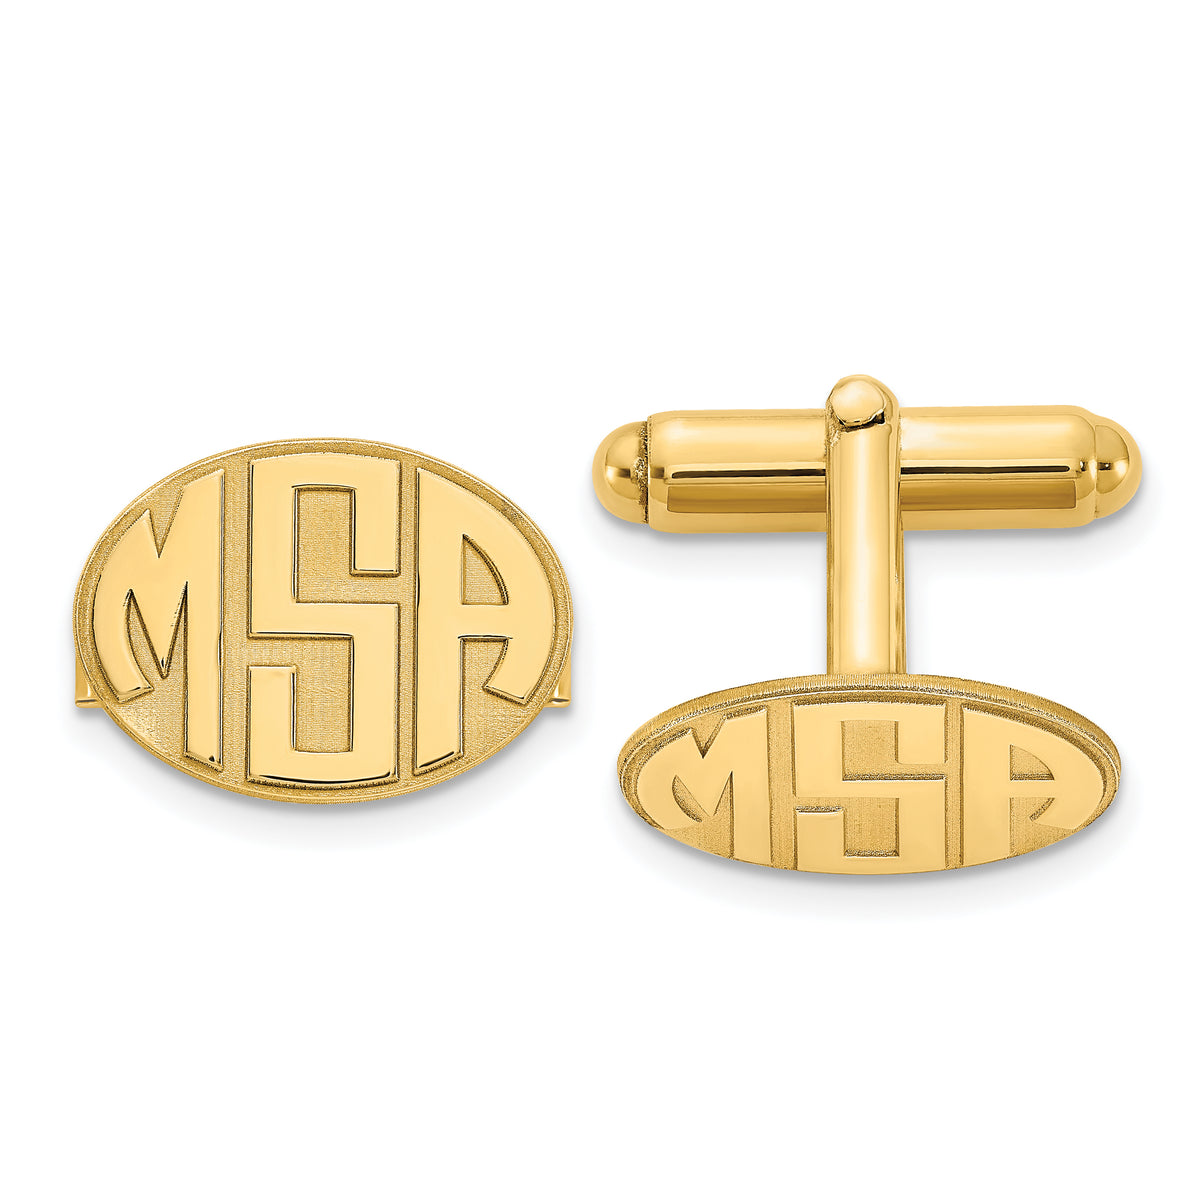 Sterling Silver or Gold Plated Sterling Silver Raised 3 Letters Oval Monogram Cuff Links